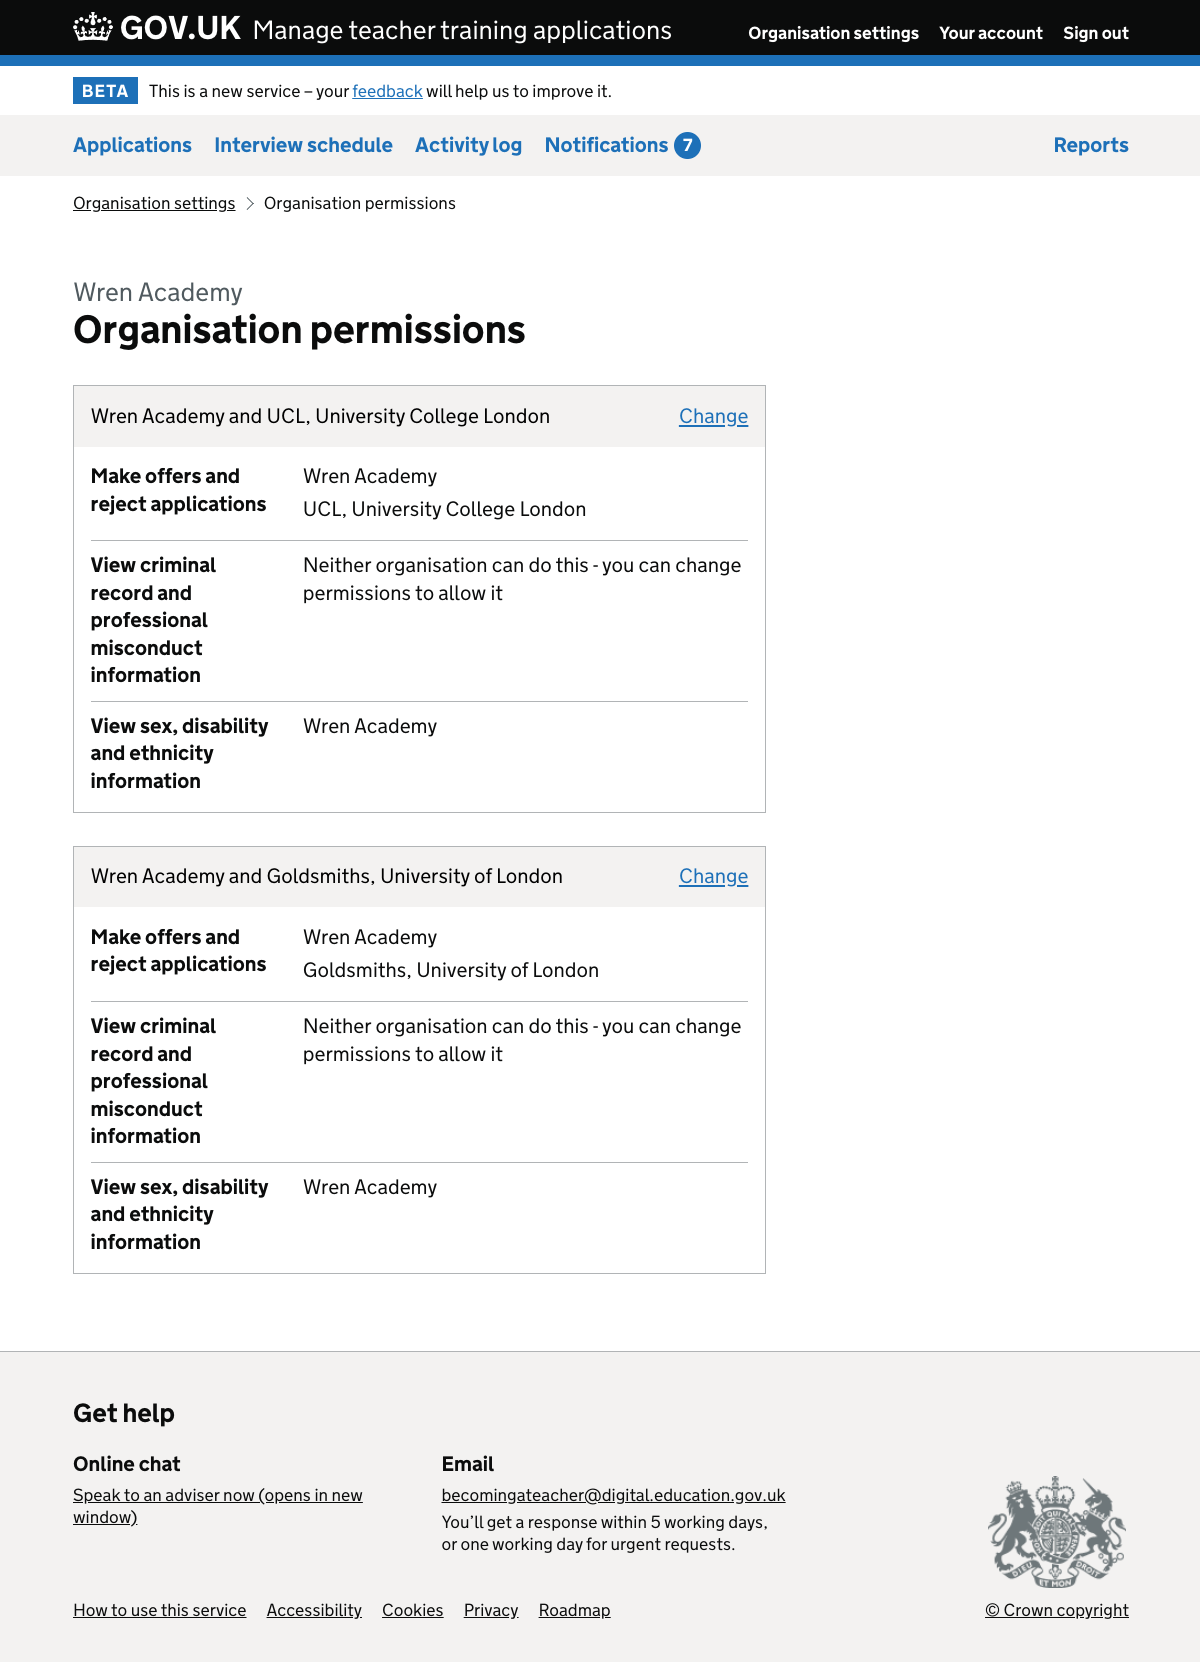 Organisation permissions page